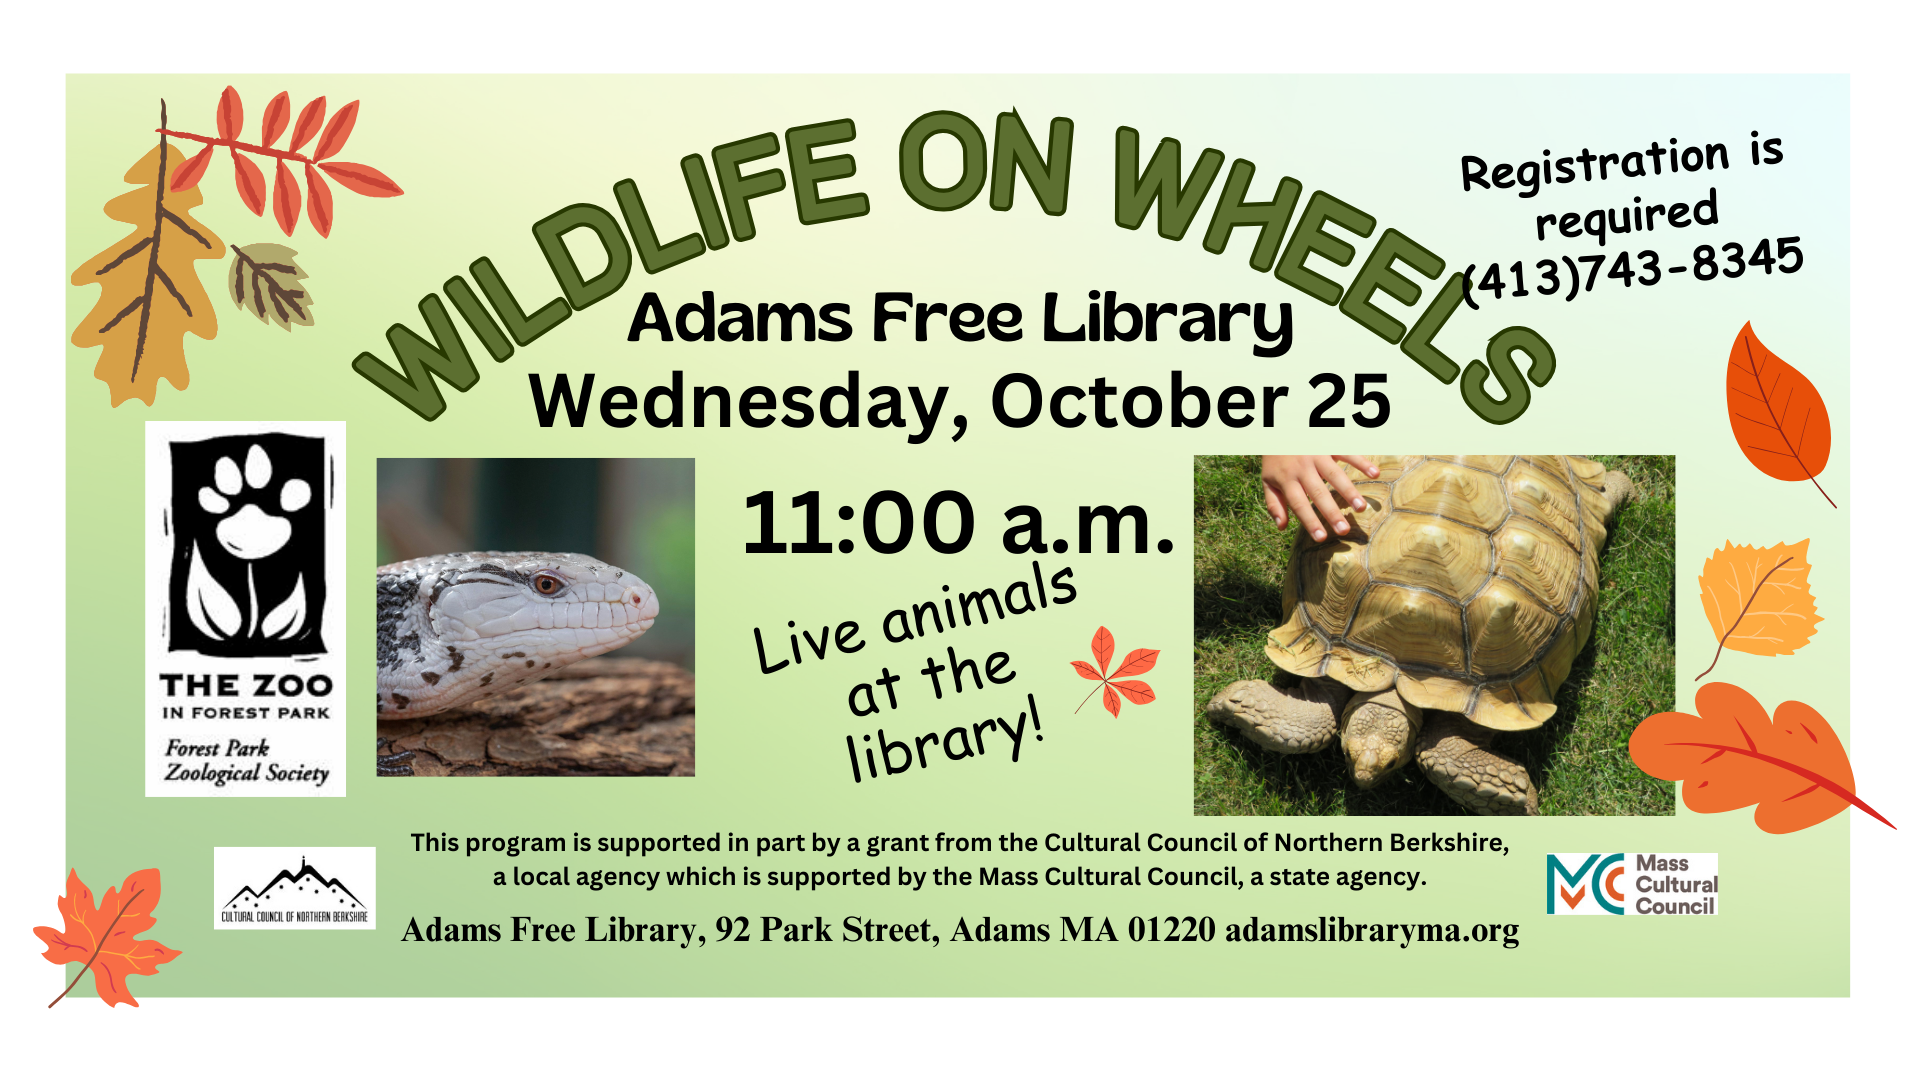 <b><p style="color:green">Registration Required: Wildlife on Wheels</p></b> @ Adams Free Library